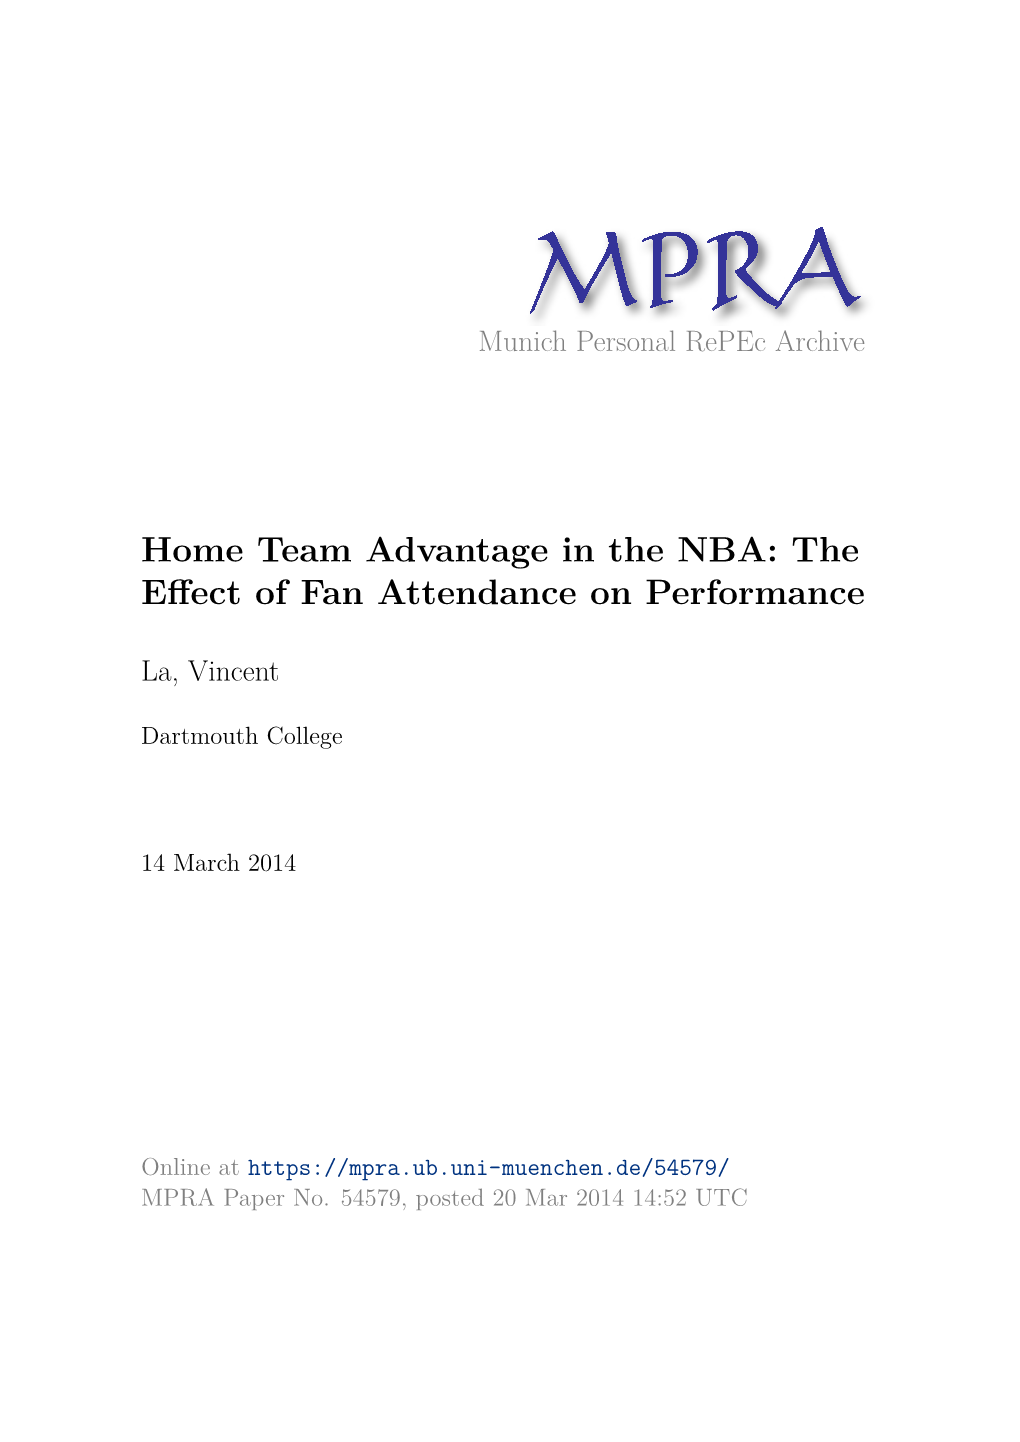 Home Team Advantage in the NBA: the Effect of Fan Attendance on Performance